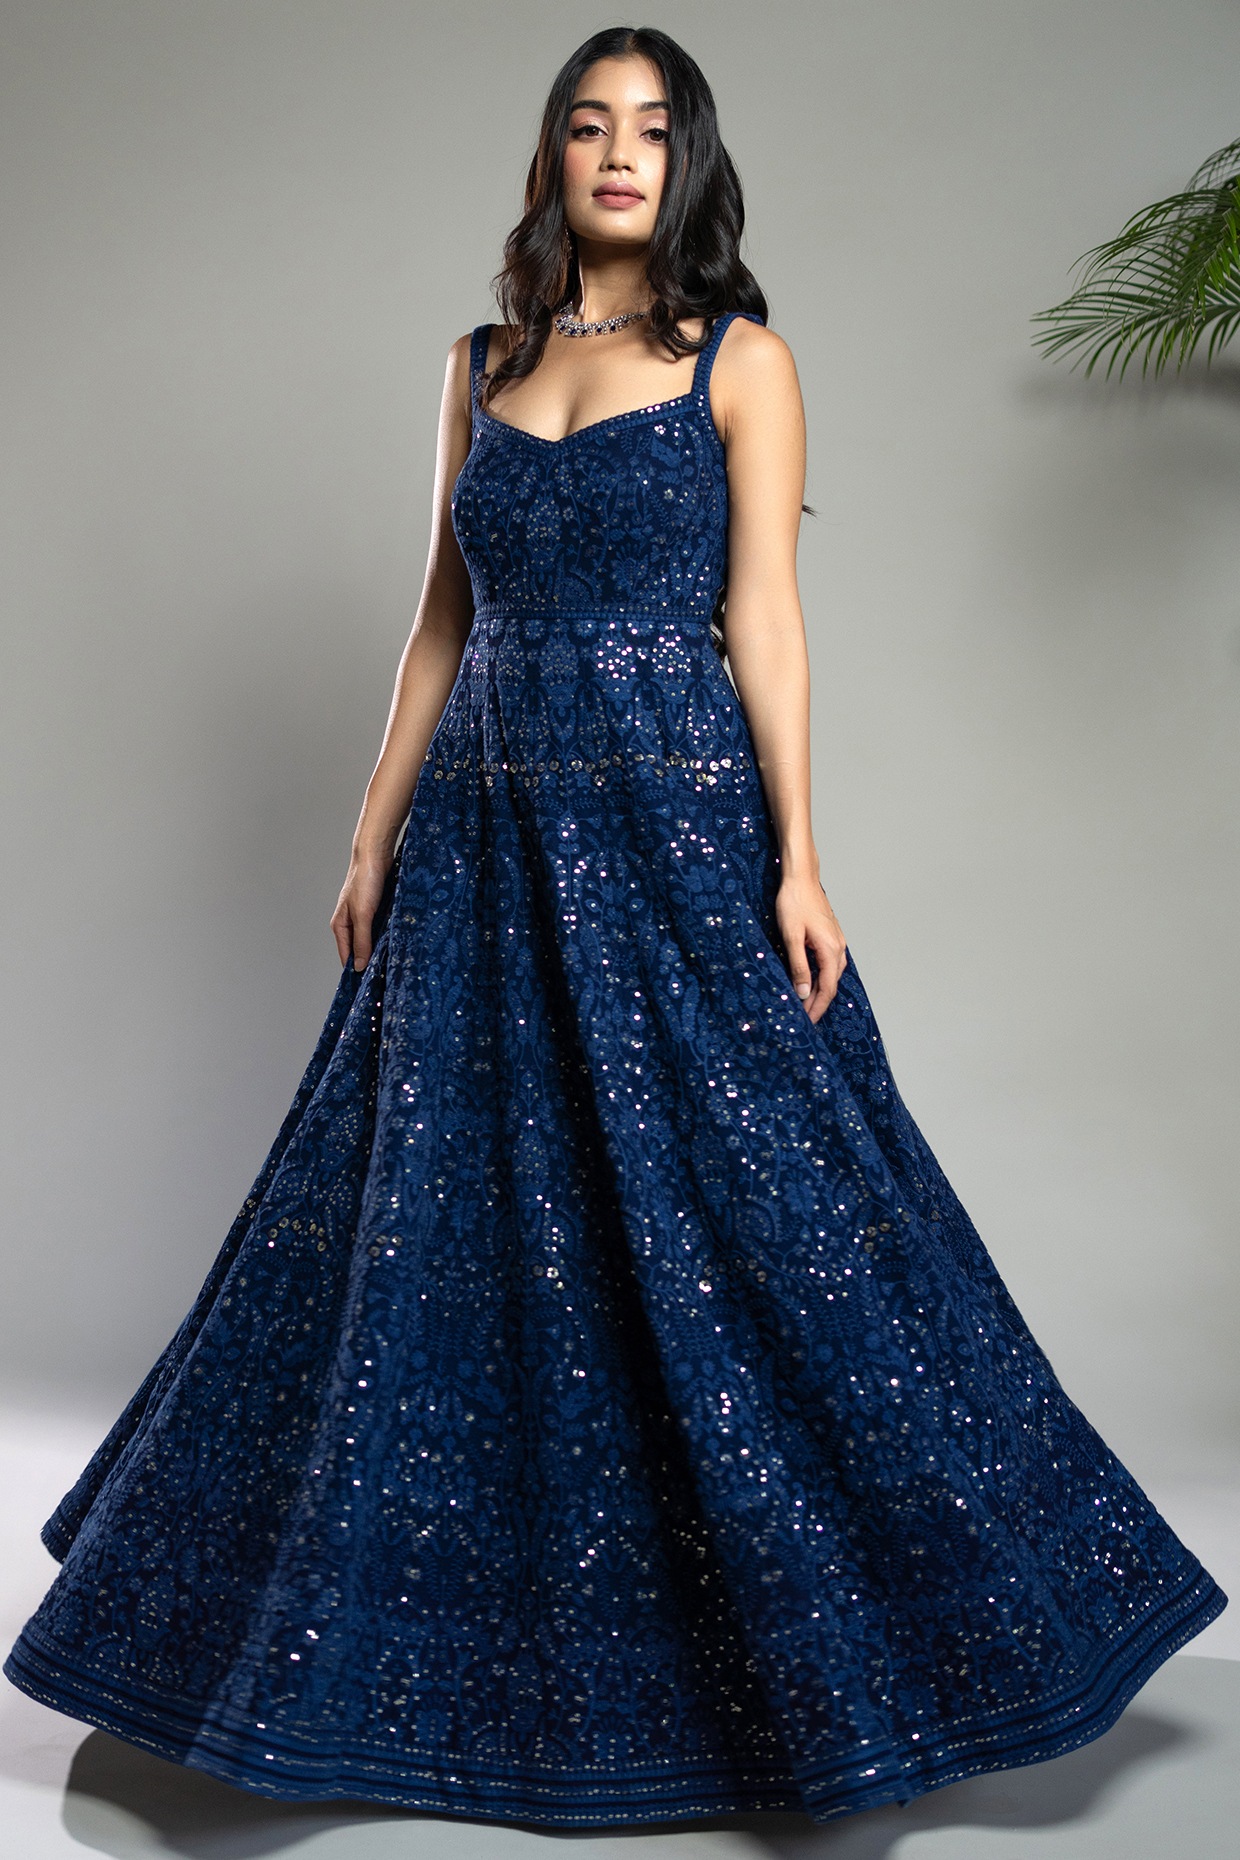 Royal Blue Sequin Top Floor Length Ball Gown Prom Dress